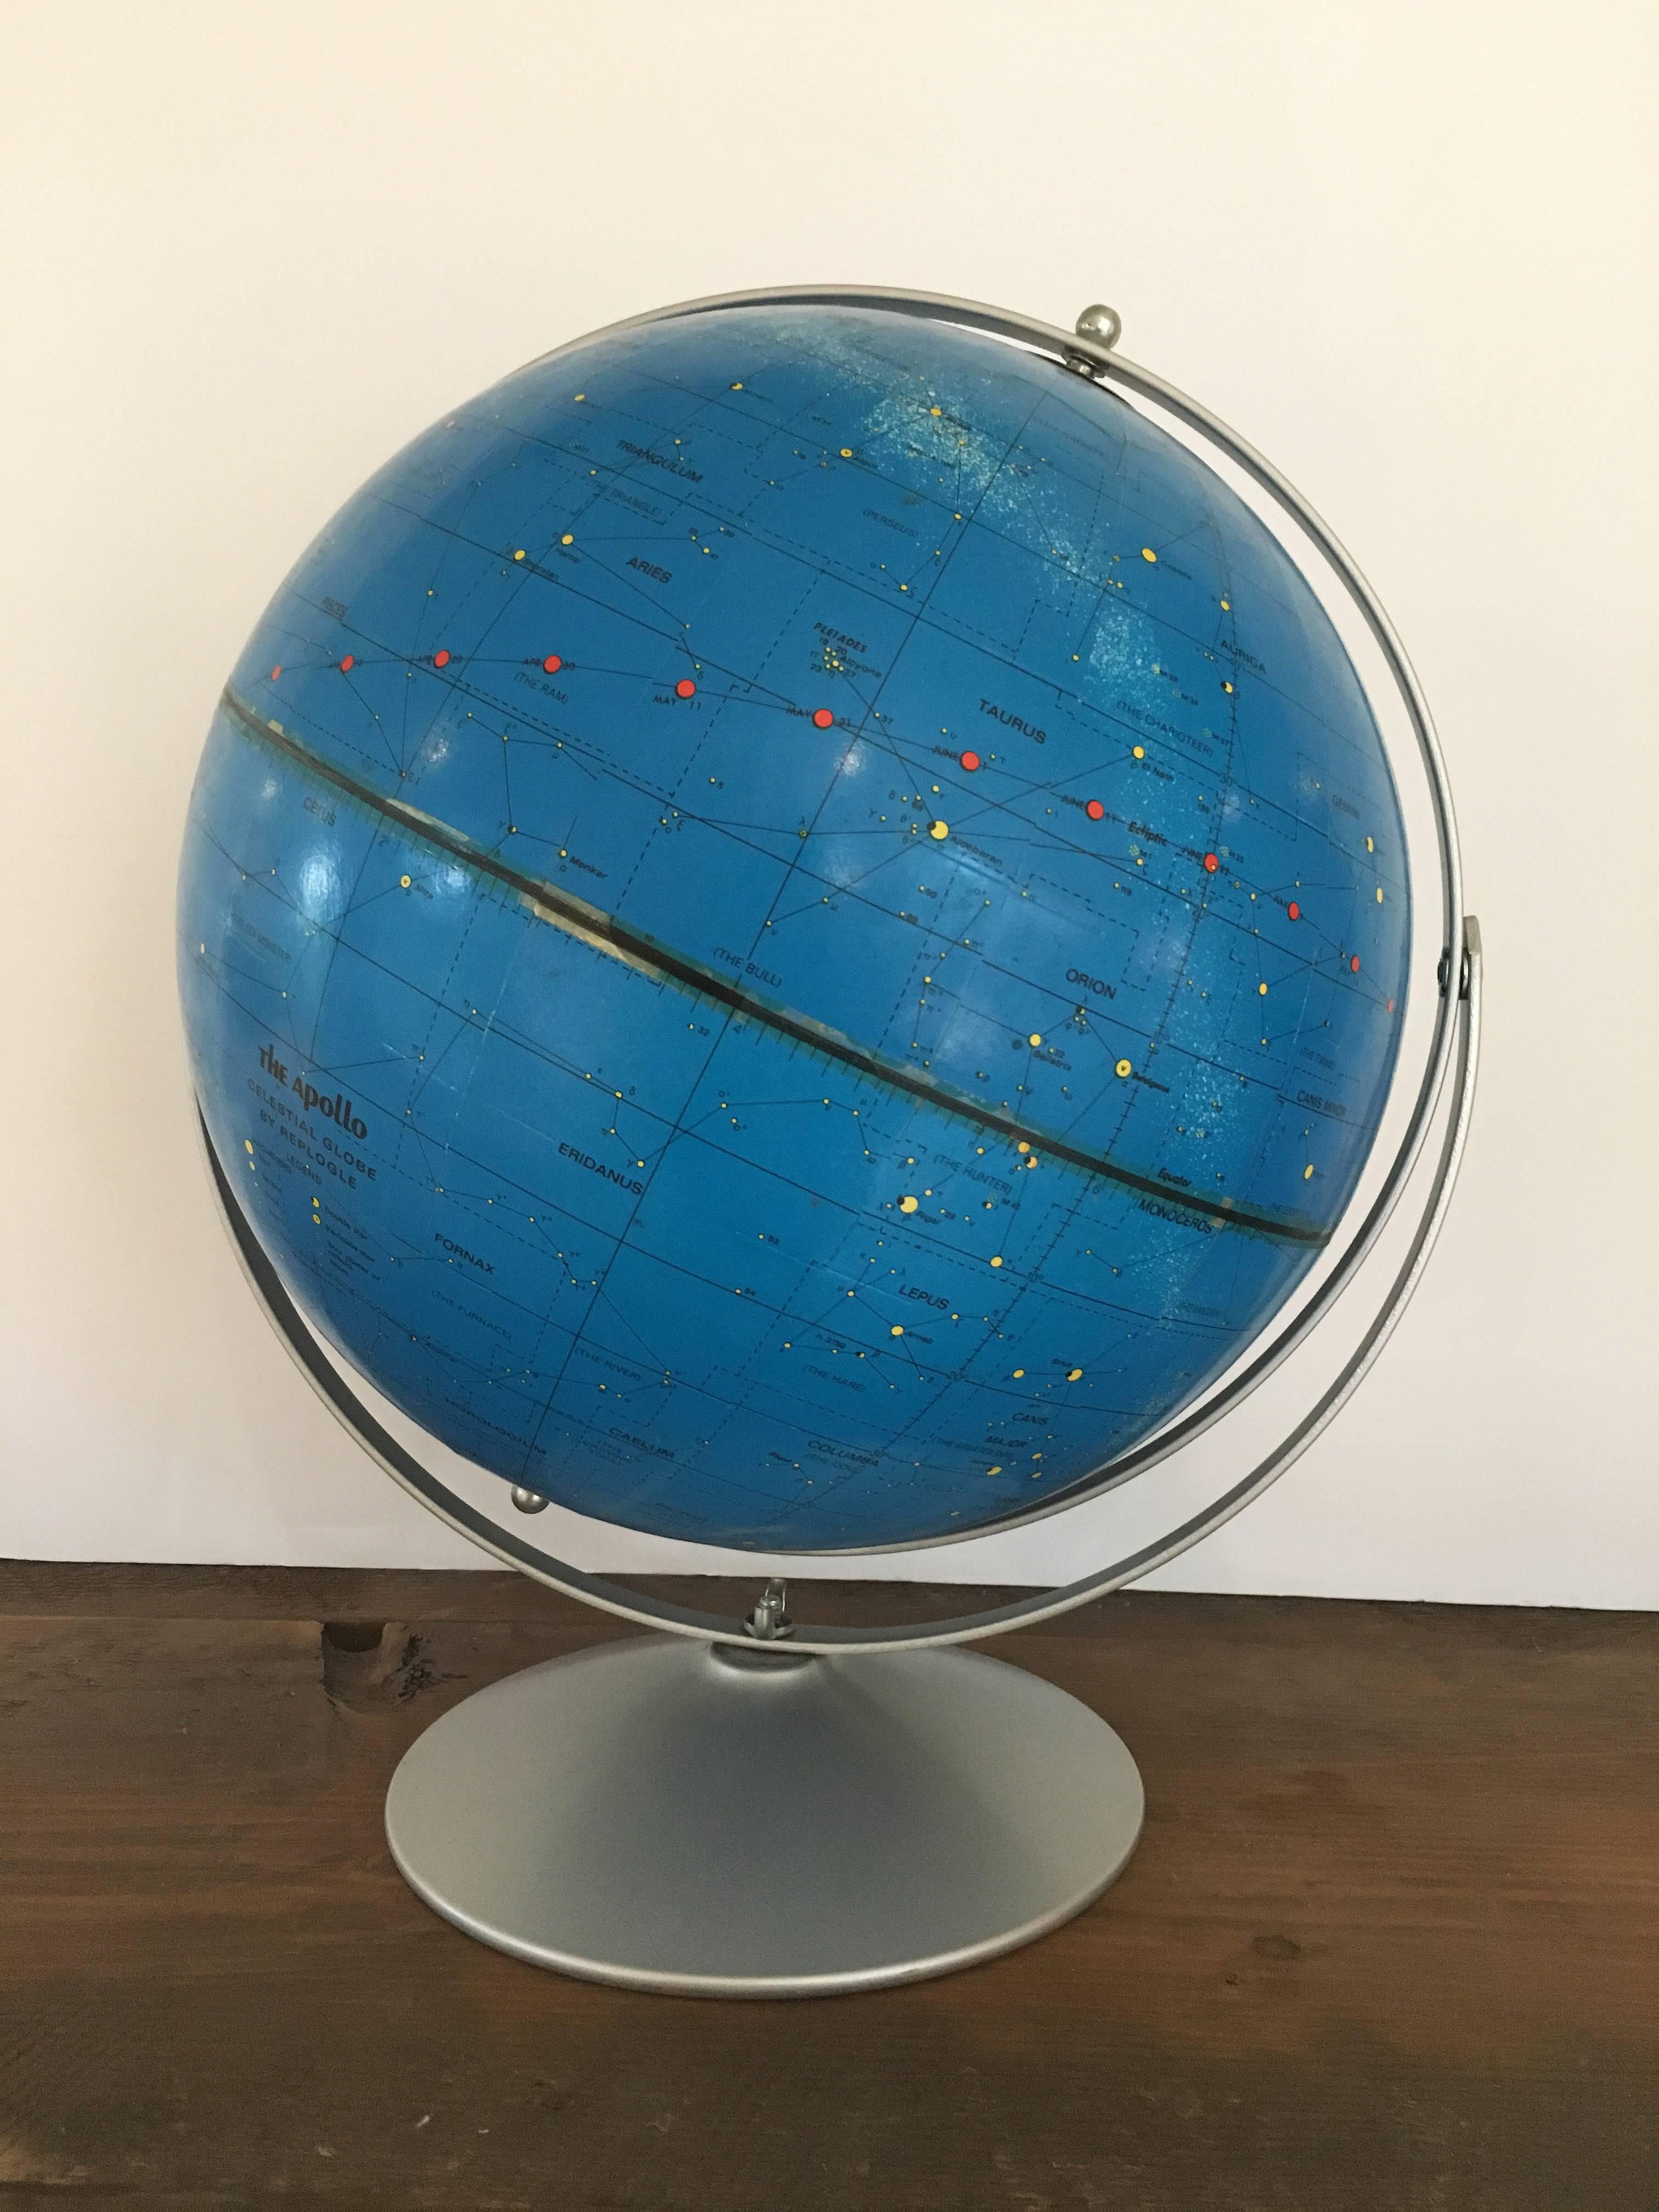 Celestial globe by Repogle, circa 1971, created in honor of Lunar Launch and named for Apollo space program.

Globe is blue with charted stars and constellations. Measures: 12"